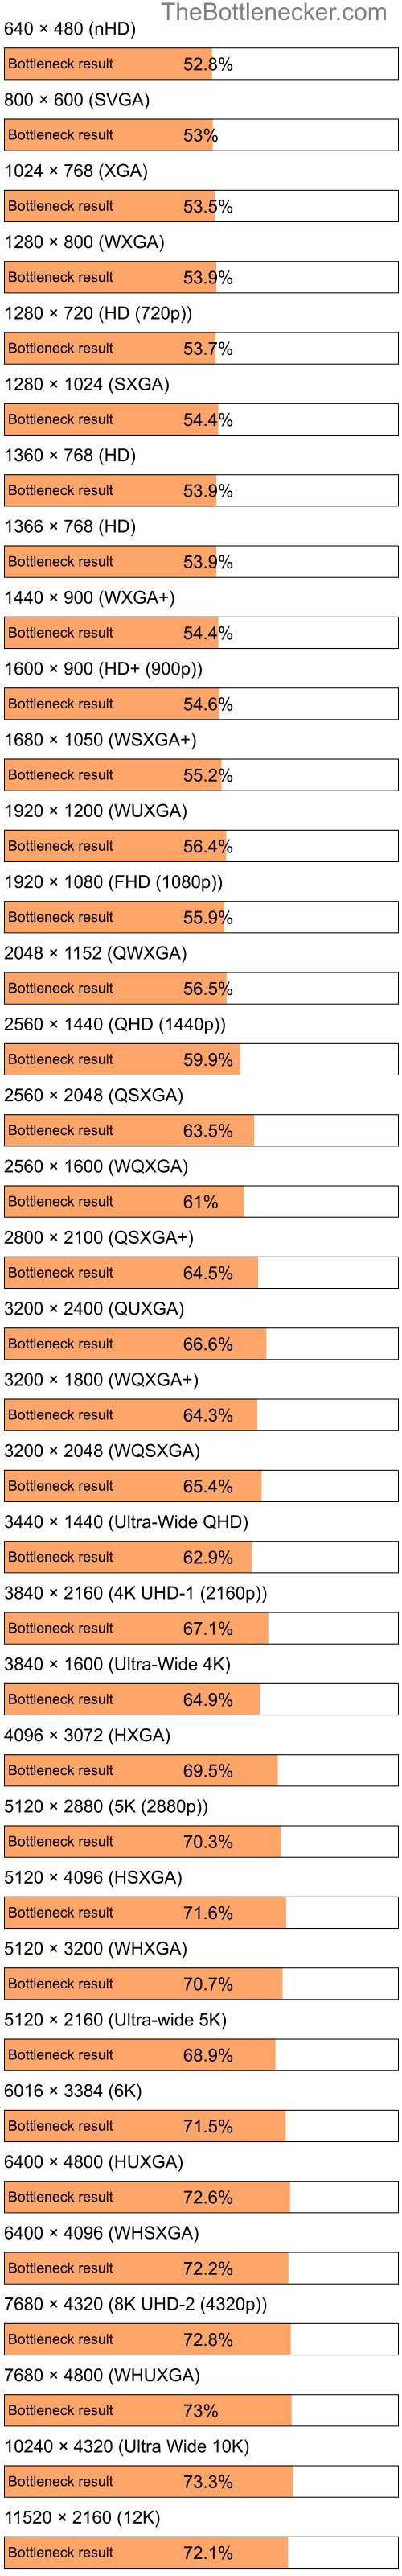 Bottleneck results by resolution for Intel Pentium 4 and AMD Radeon HD 6250 in Processor Intense Tasks